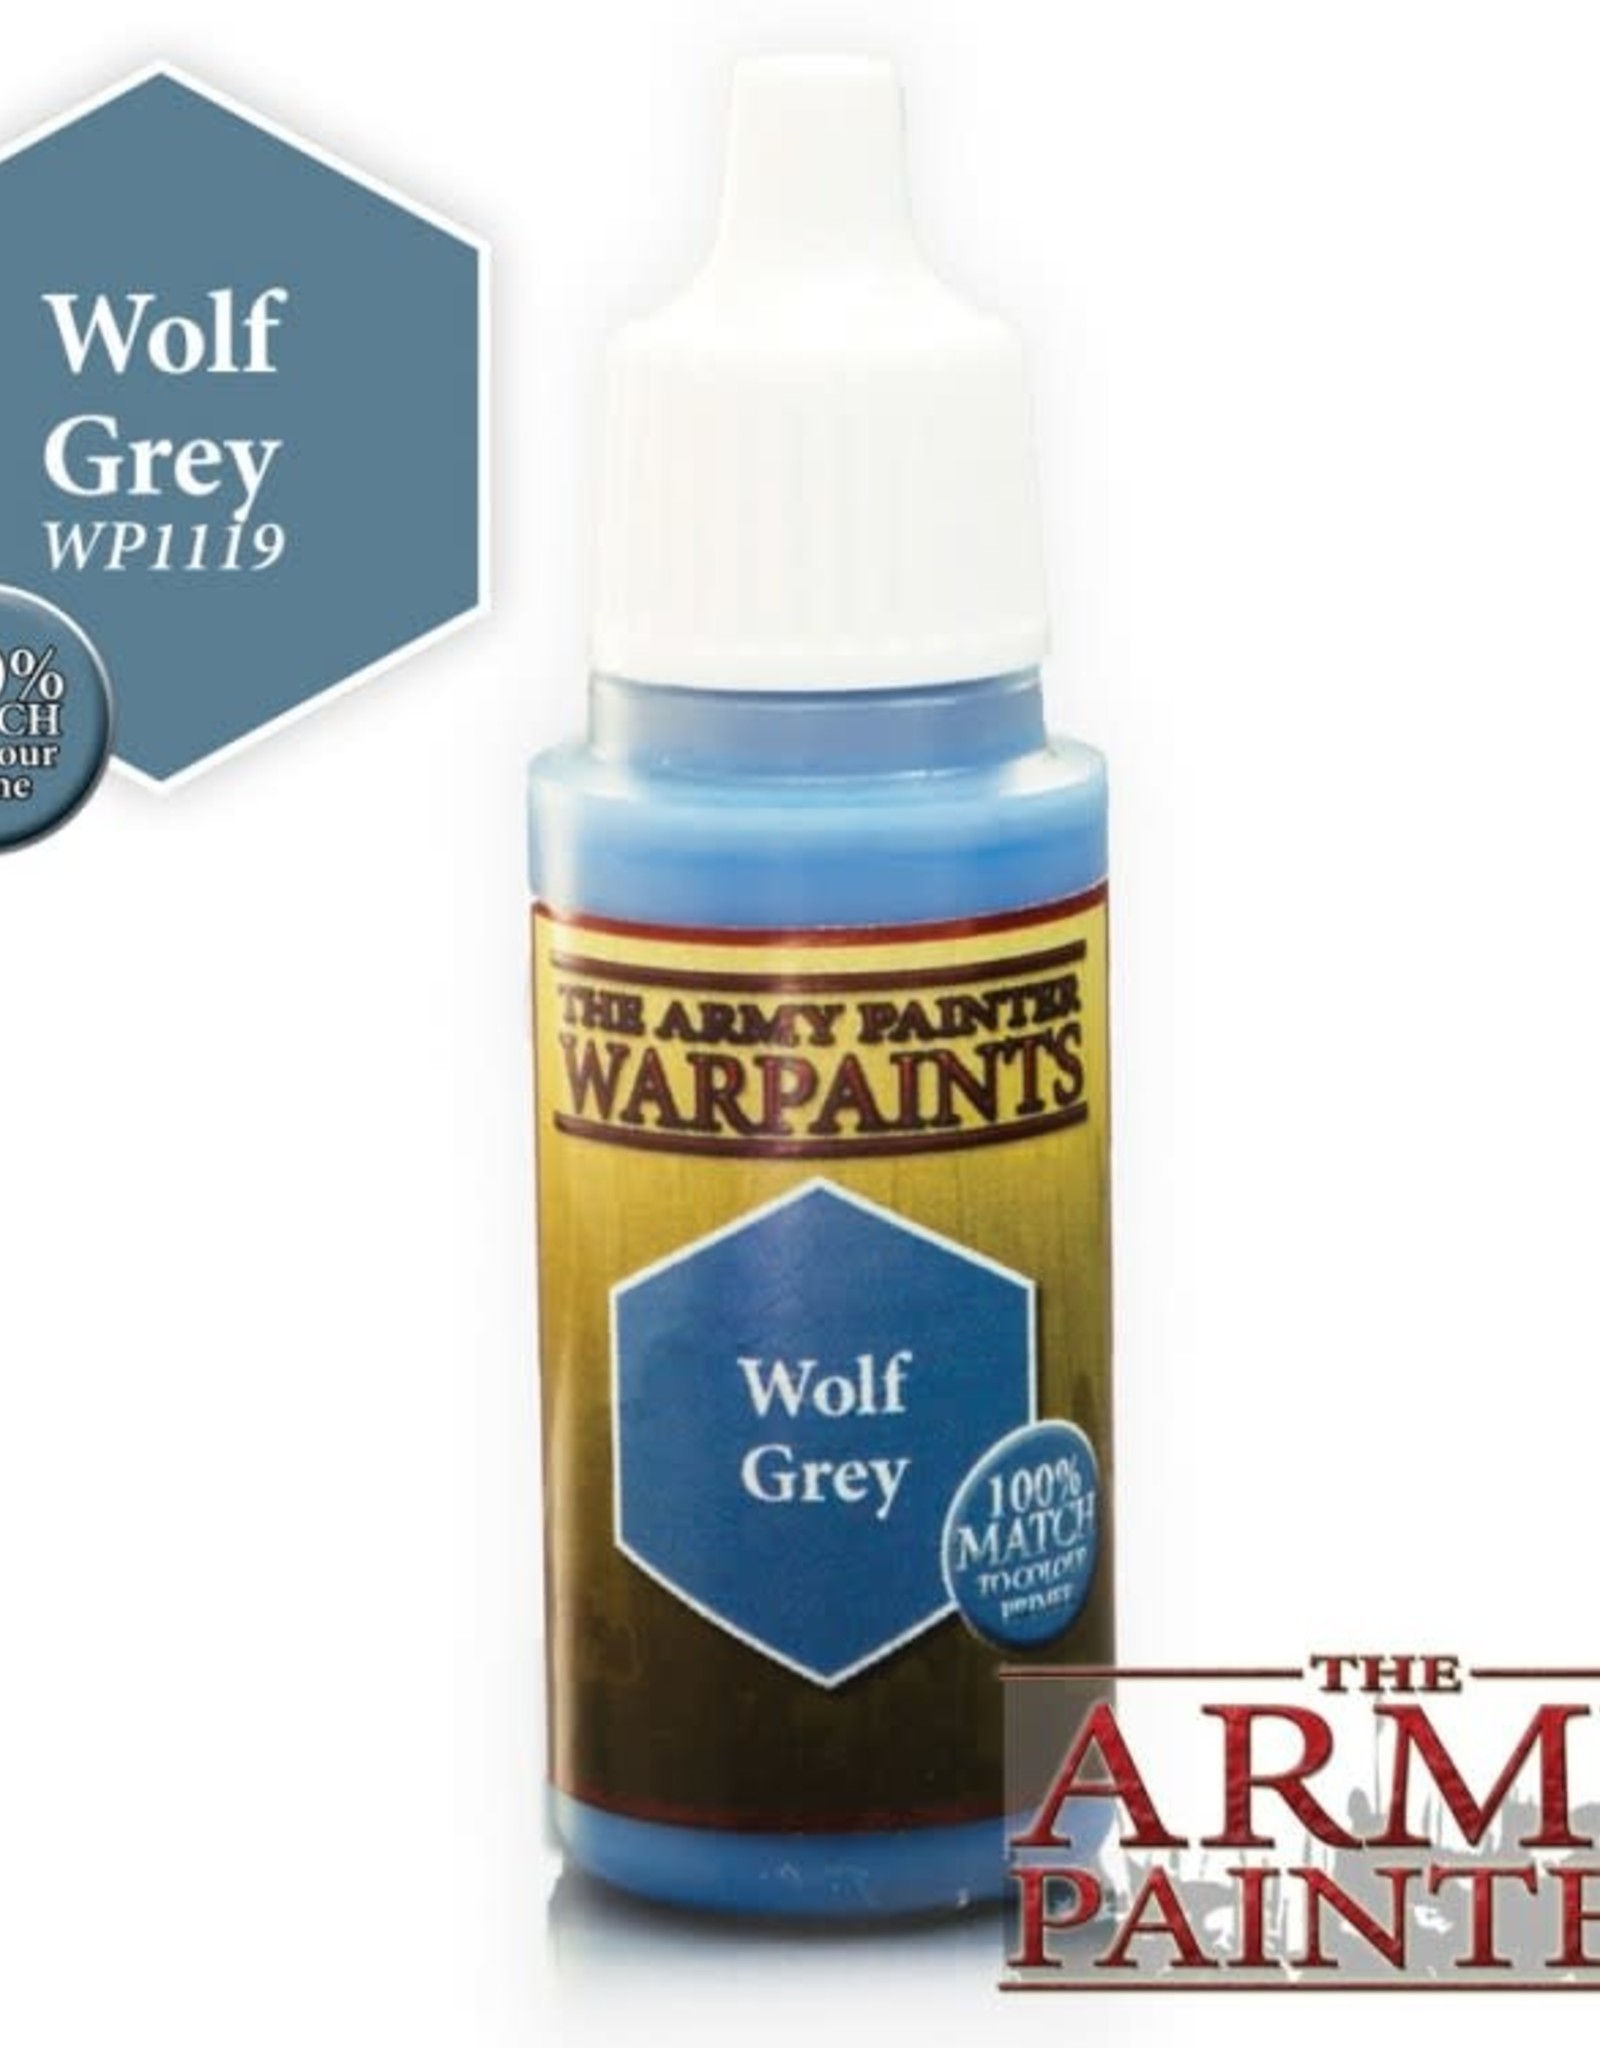 The Army Painter Warpaints - Wolf Grey